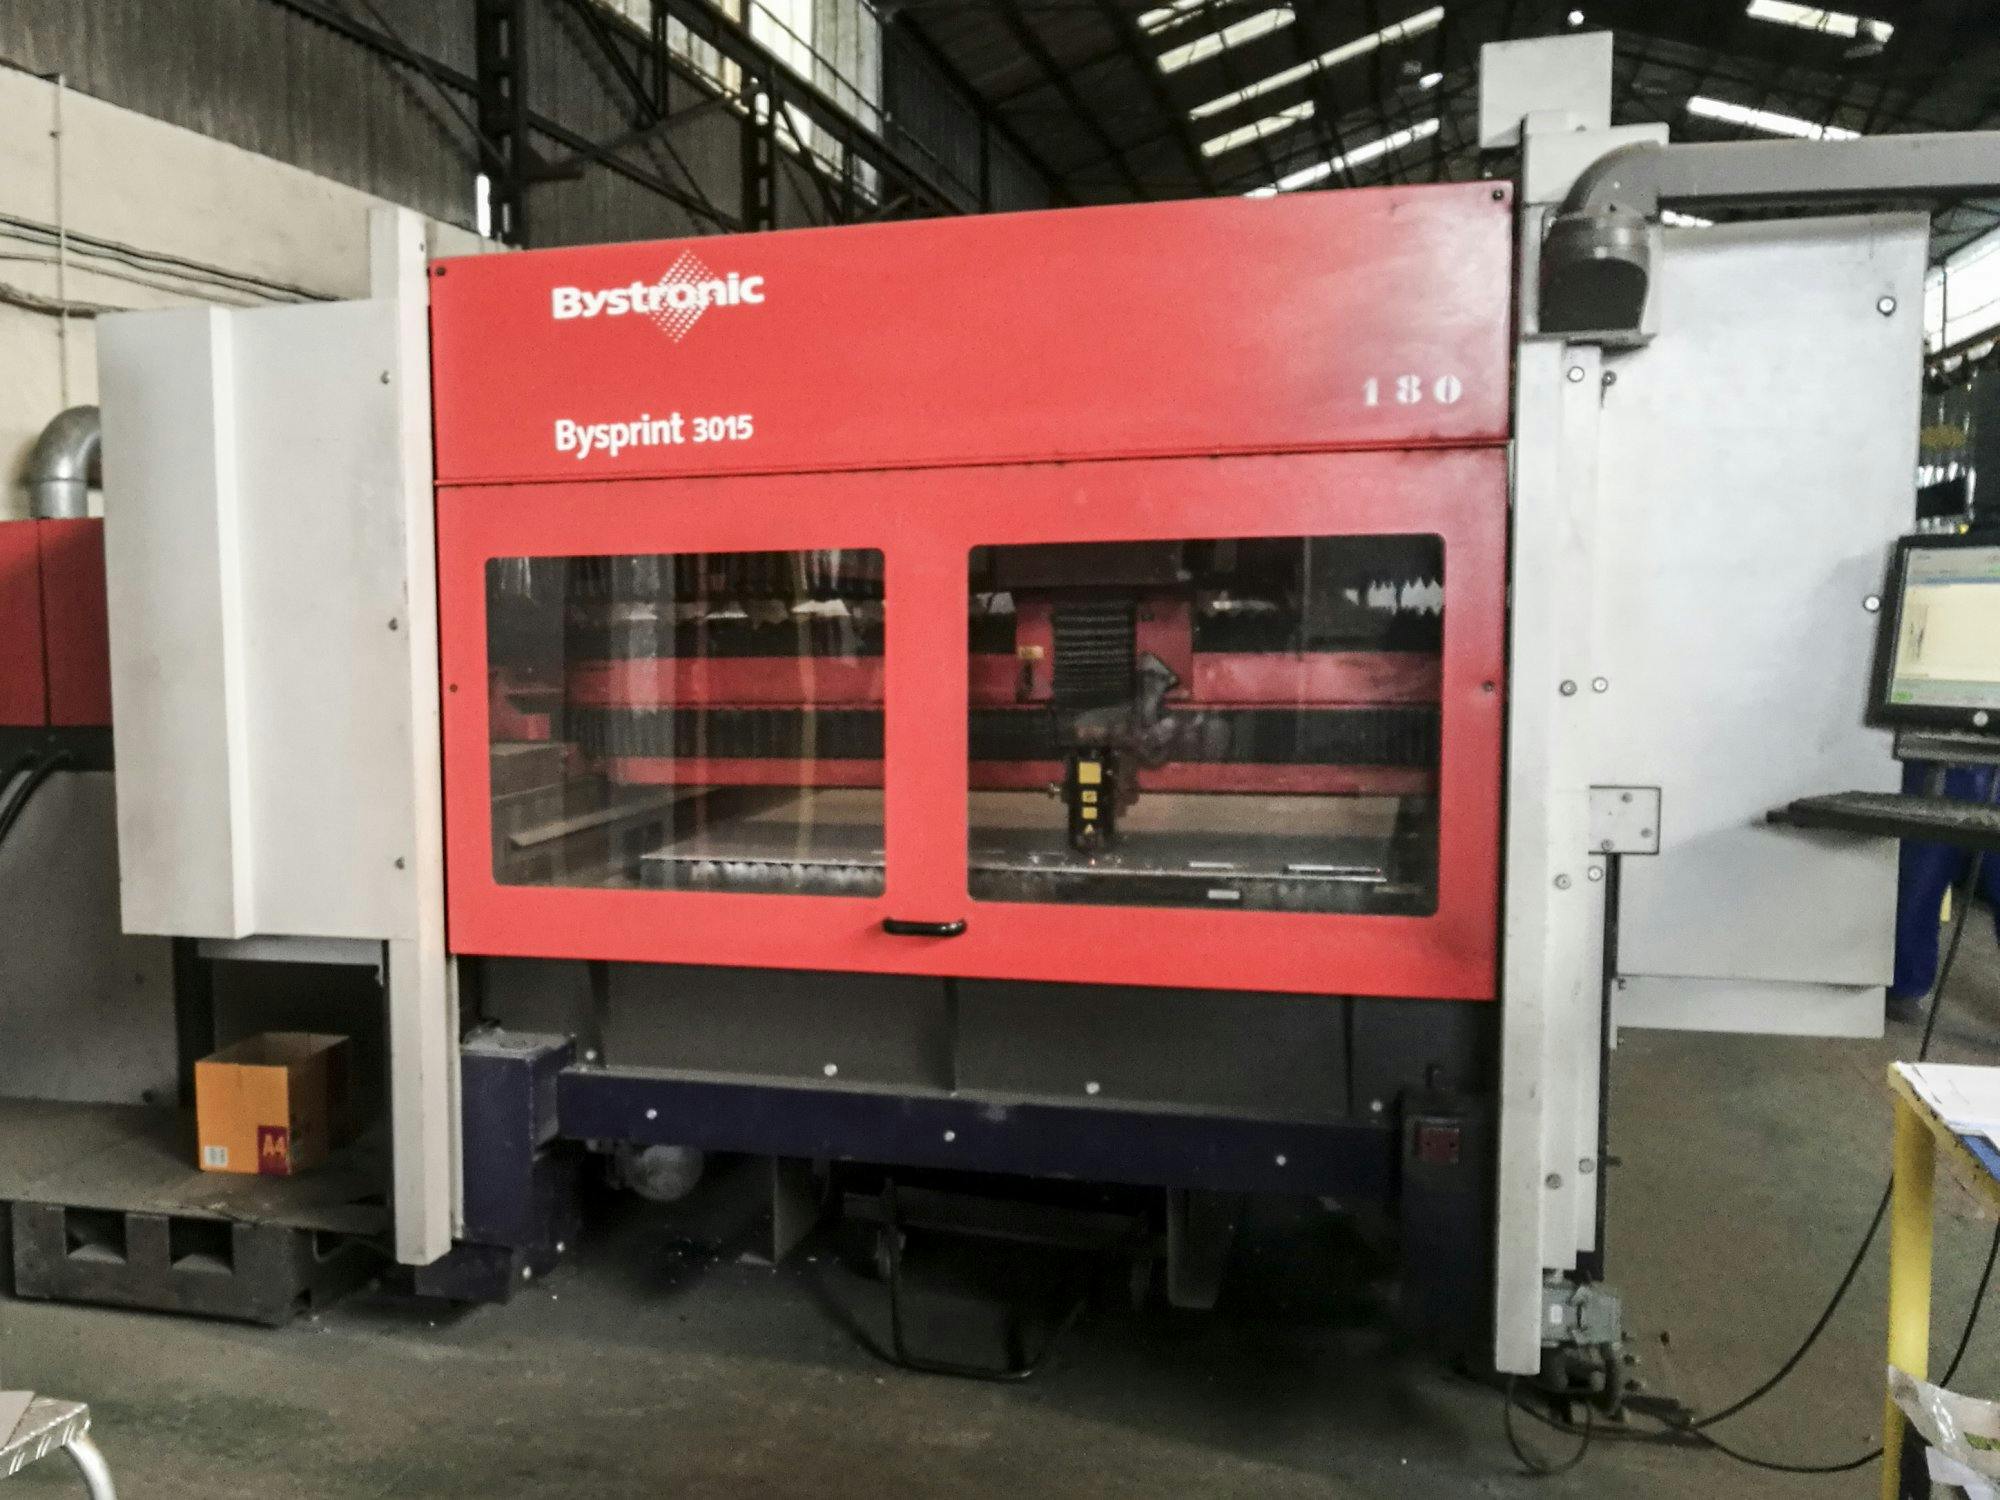 Front view of Bystronic BySprint 3015 Machine